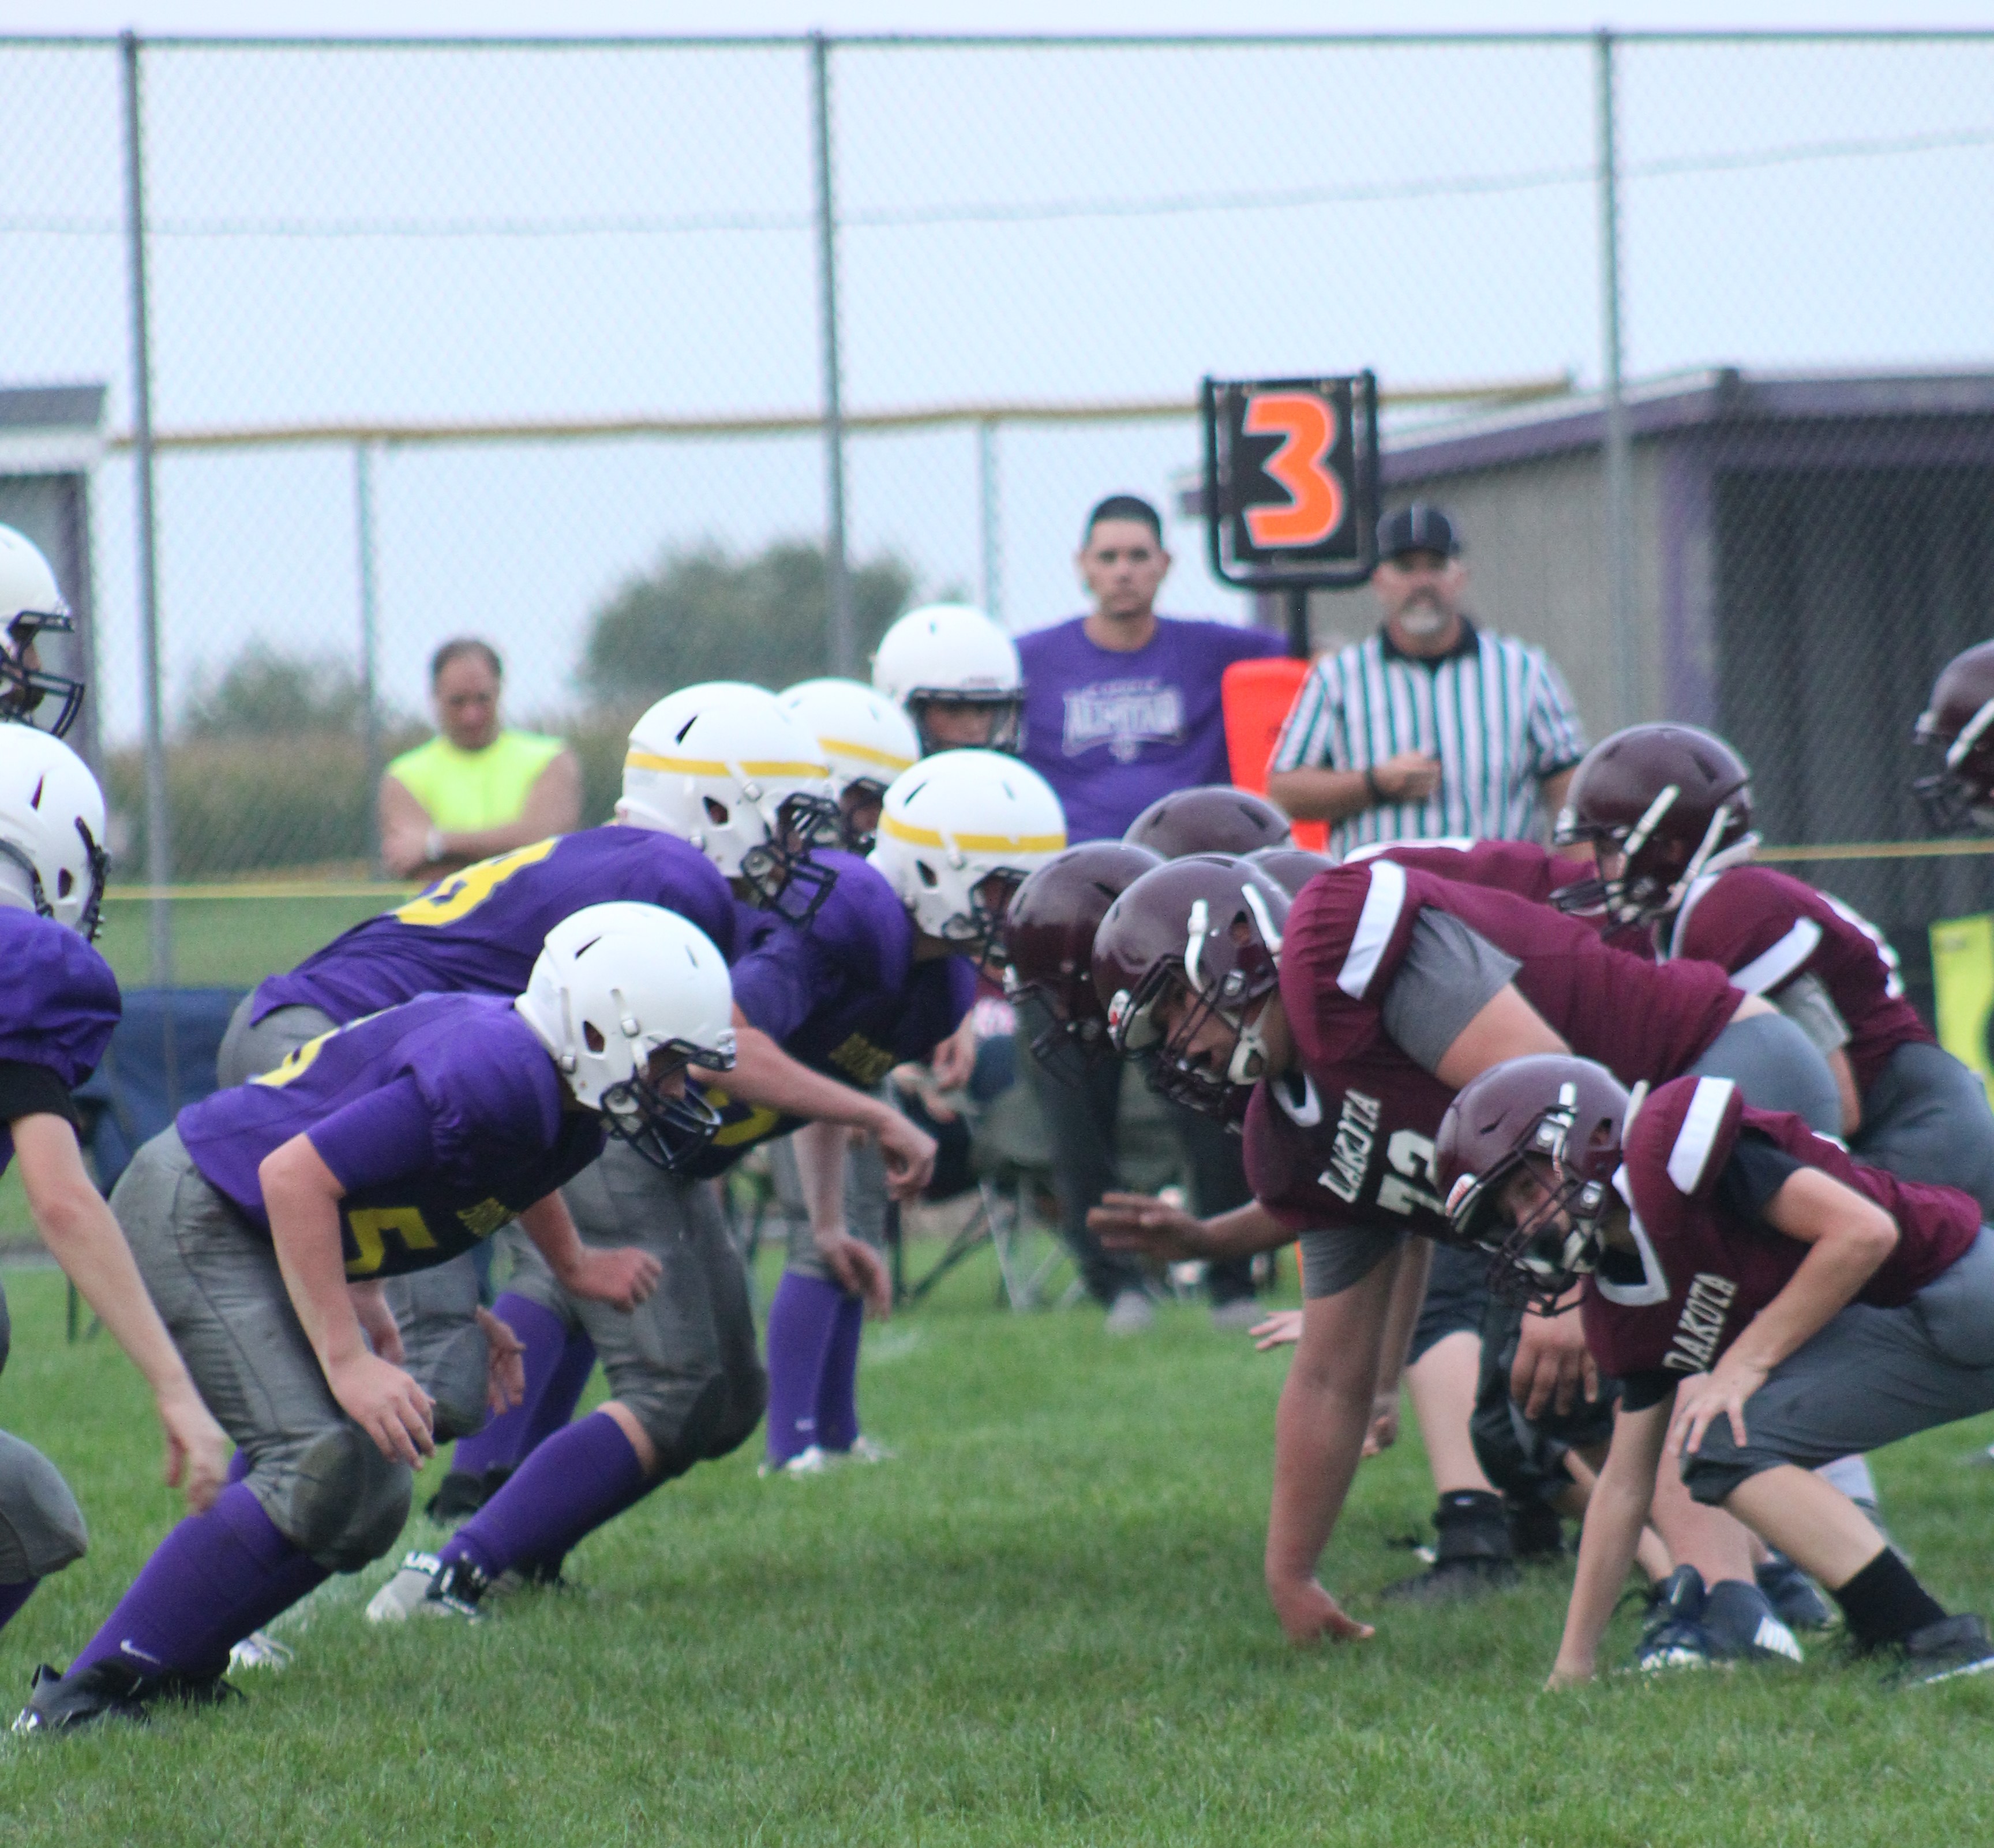 two football teams on the field facing each other at the line